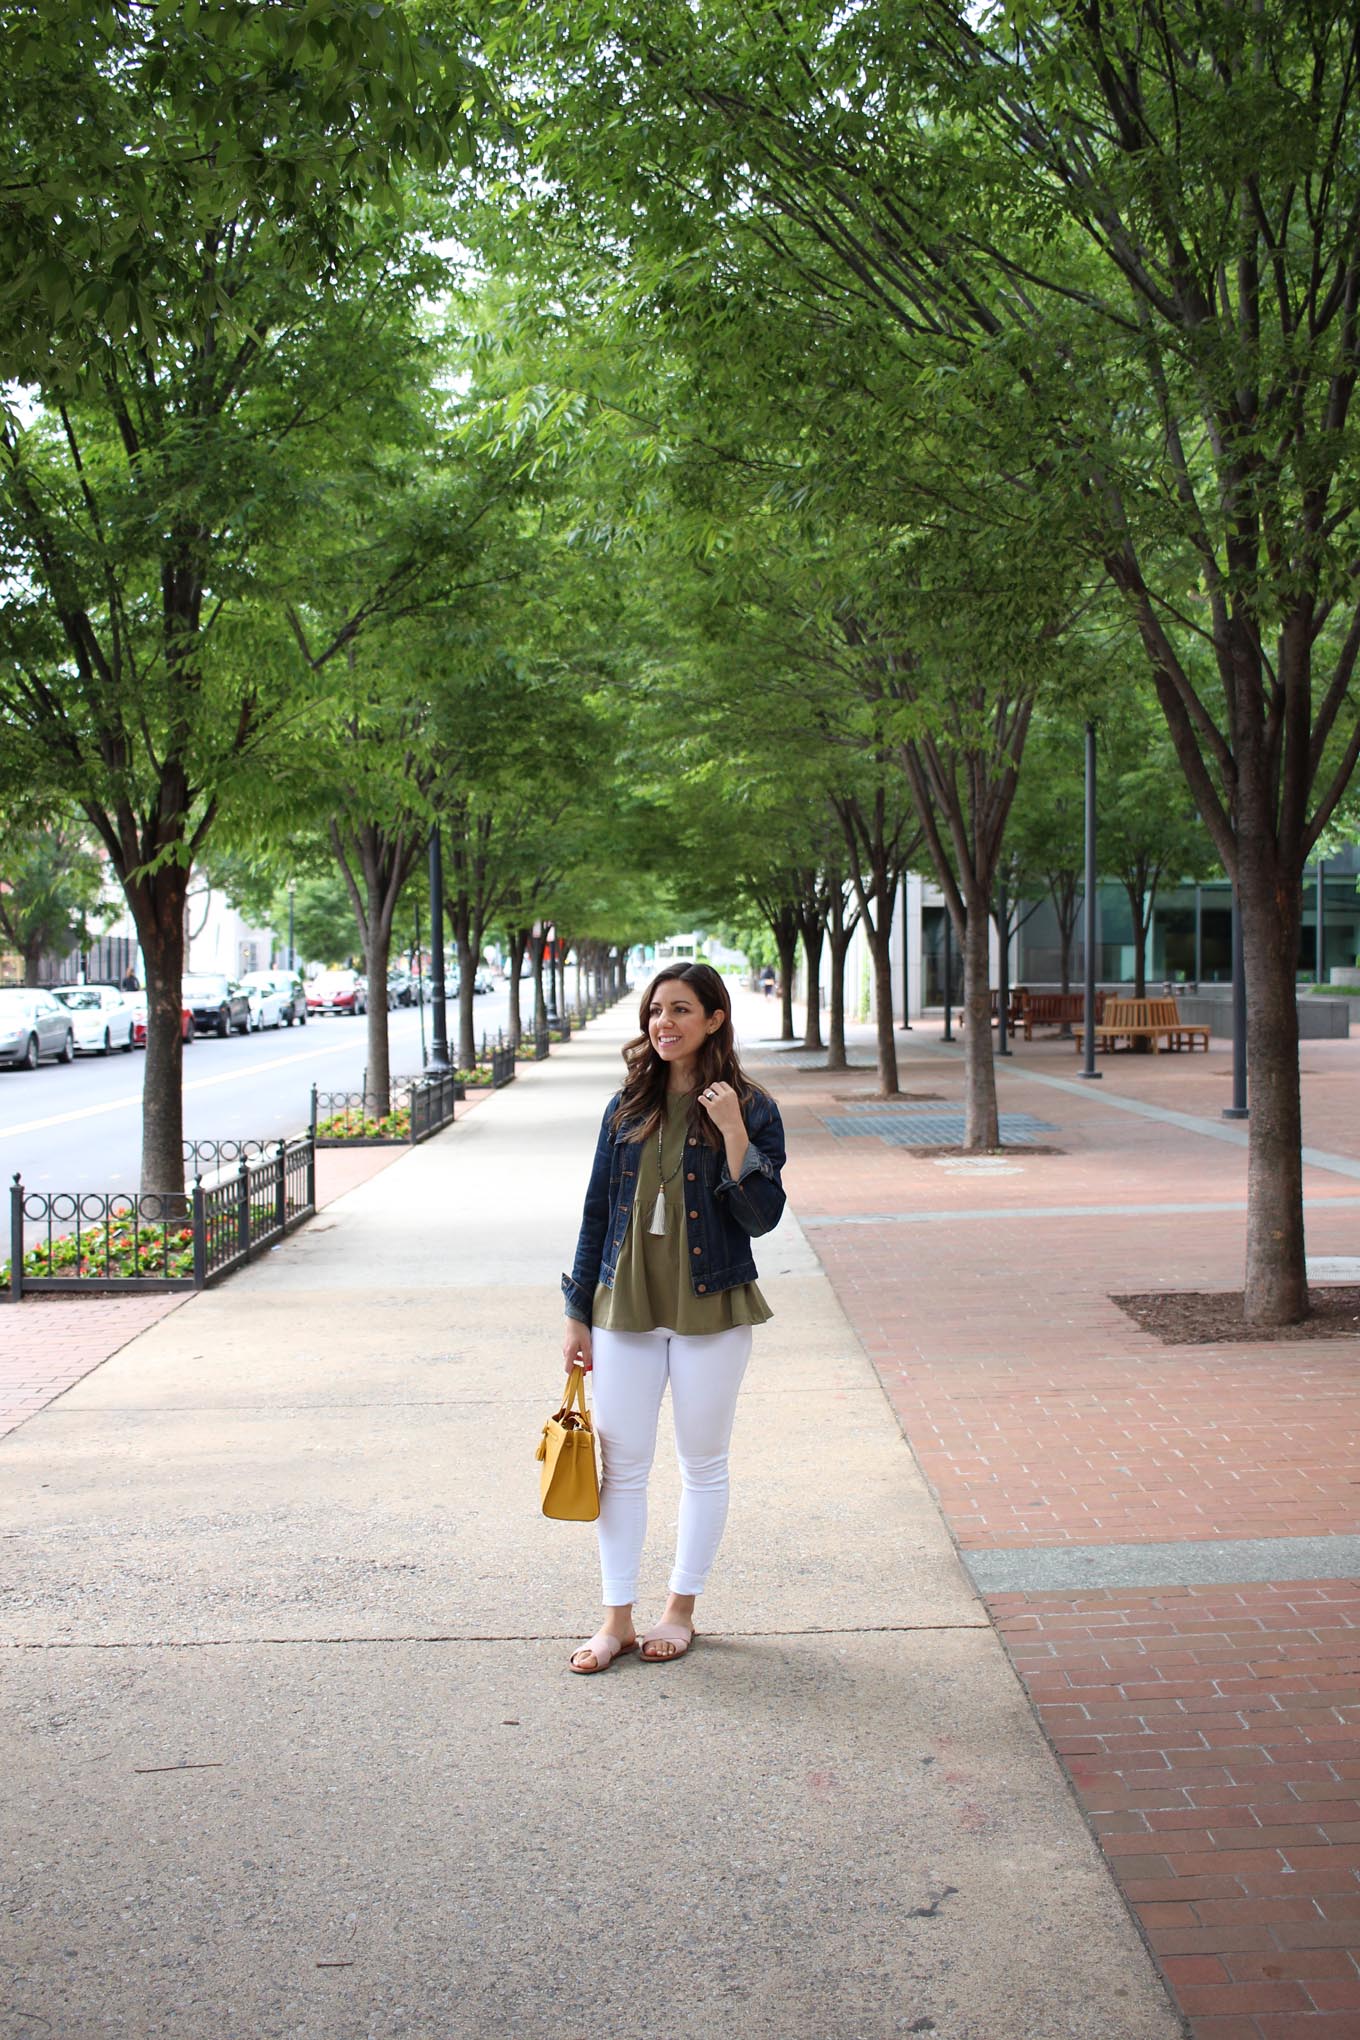 Lifestyle Blogger Roxanne of Glass of Glam wearing an army green peplum top, white denim, kate spade bag, and pink slides